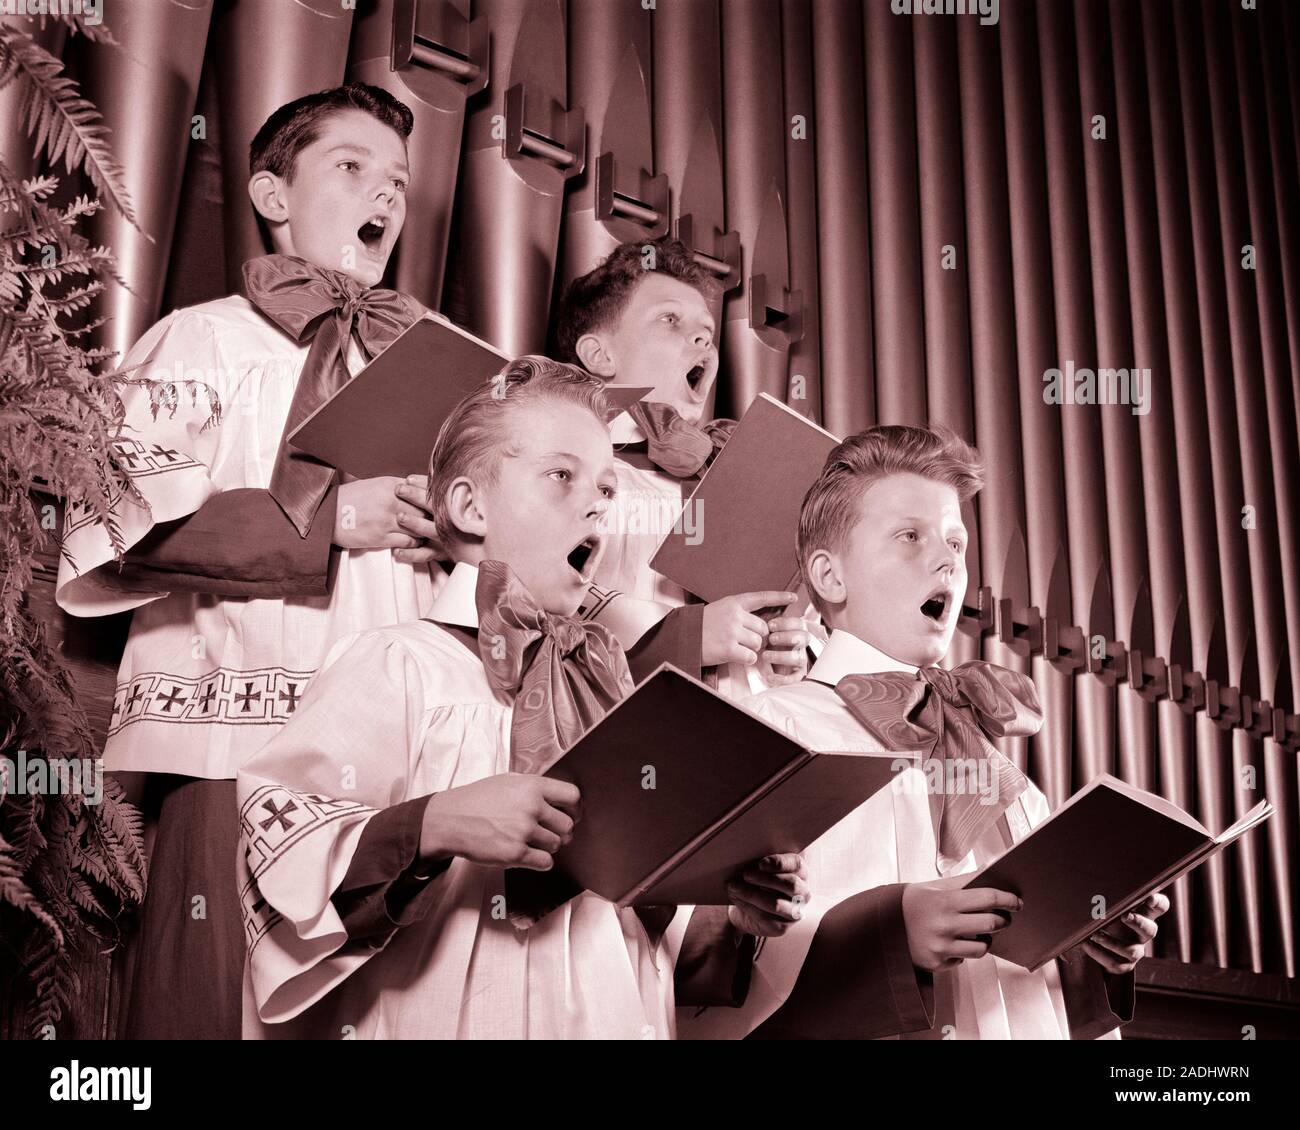 1940s FOUR CHOIRBOYS SINGING TOGETHER HOLDING HYMN BOOKS STANDING IN FRONT OF CHURCH ORGAN PIPES - c2873 HAR001 HARS INSPIRATION CARING MALES ENTERTAINMENT SIBLINGS SPIRITUALITY CONFIDENCE CHORUS B&W SUCCESS PERFORMING ARTS PIPES STRENGTH LOW ANGLE POWERFUL RECREATION HYMN PRIDE SIBLING CONCEPTUAL STYLISH IN FRONT OF CHORAL CHOIRBOYS COOPERATION GROWTH HARMONY HONORABLE JUVENILES PRE-TEEN PRE-TEEN BOY PRECISION TOGETHERNESS VOICES BLACK AND WHITE CAUCASIAN ETHNICITY HAR001 OLD FASHIONED Stock Photo